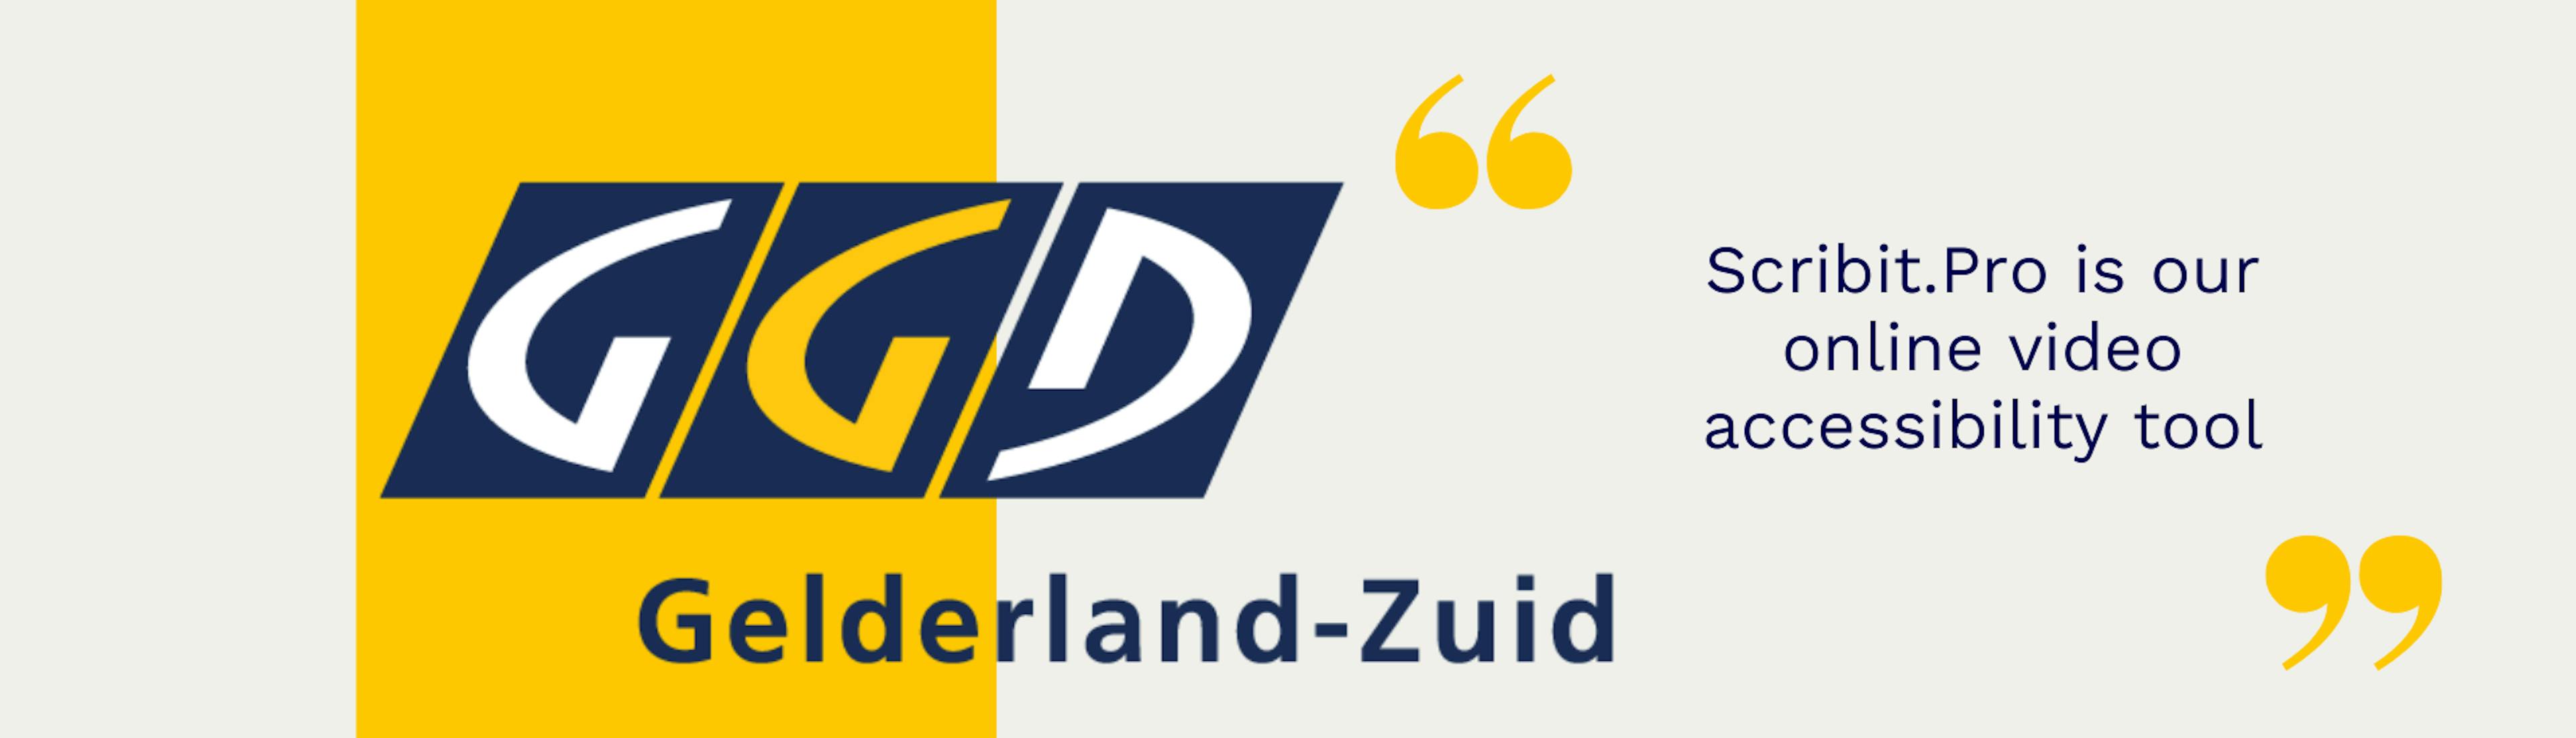 Logo GGD Gelderland-Zuid with a yellow block behind it. To the right of it is in yellow quotes: Scribit.Pro has become our tool for online video accessibility.